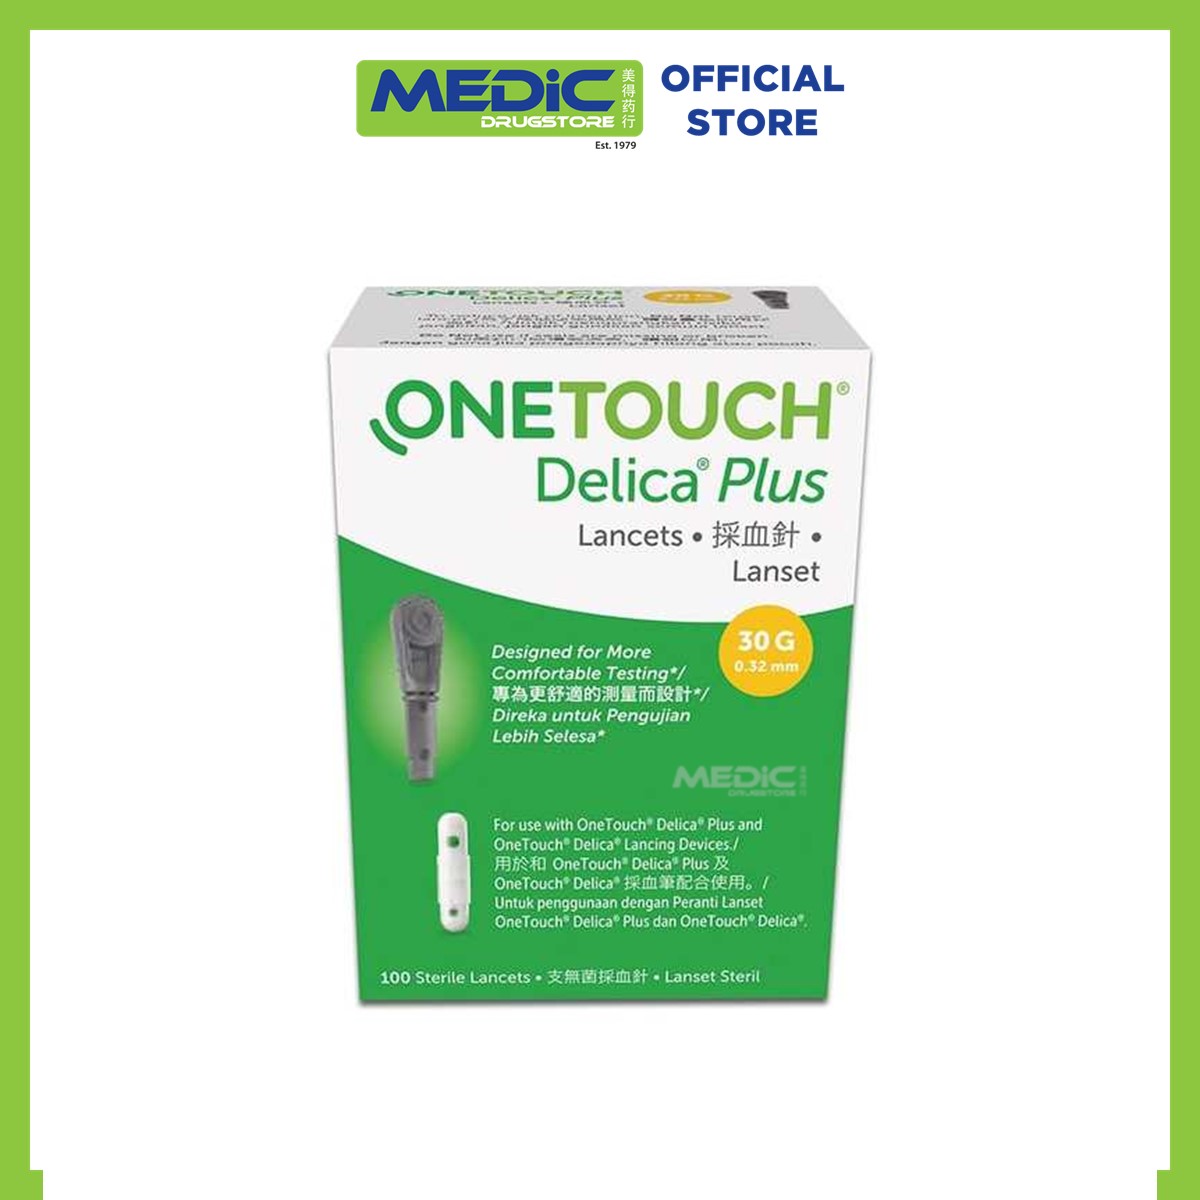 EXP:2024-10 ONETOUCH Ultra Blood Suger Meter 100pcs Test strips One Touch  Bloedglucose Mesure Glucose Tester